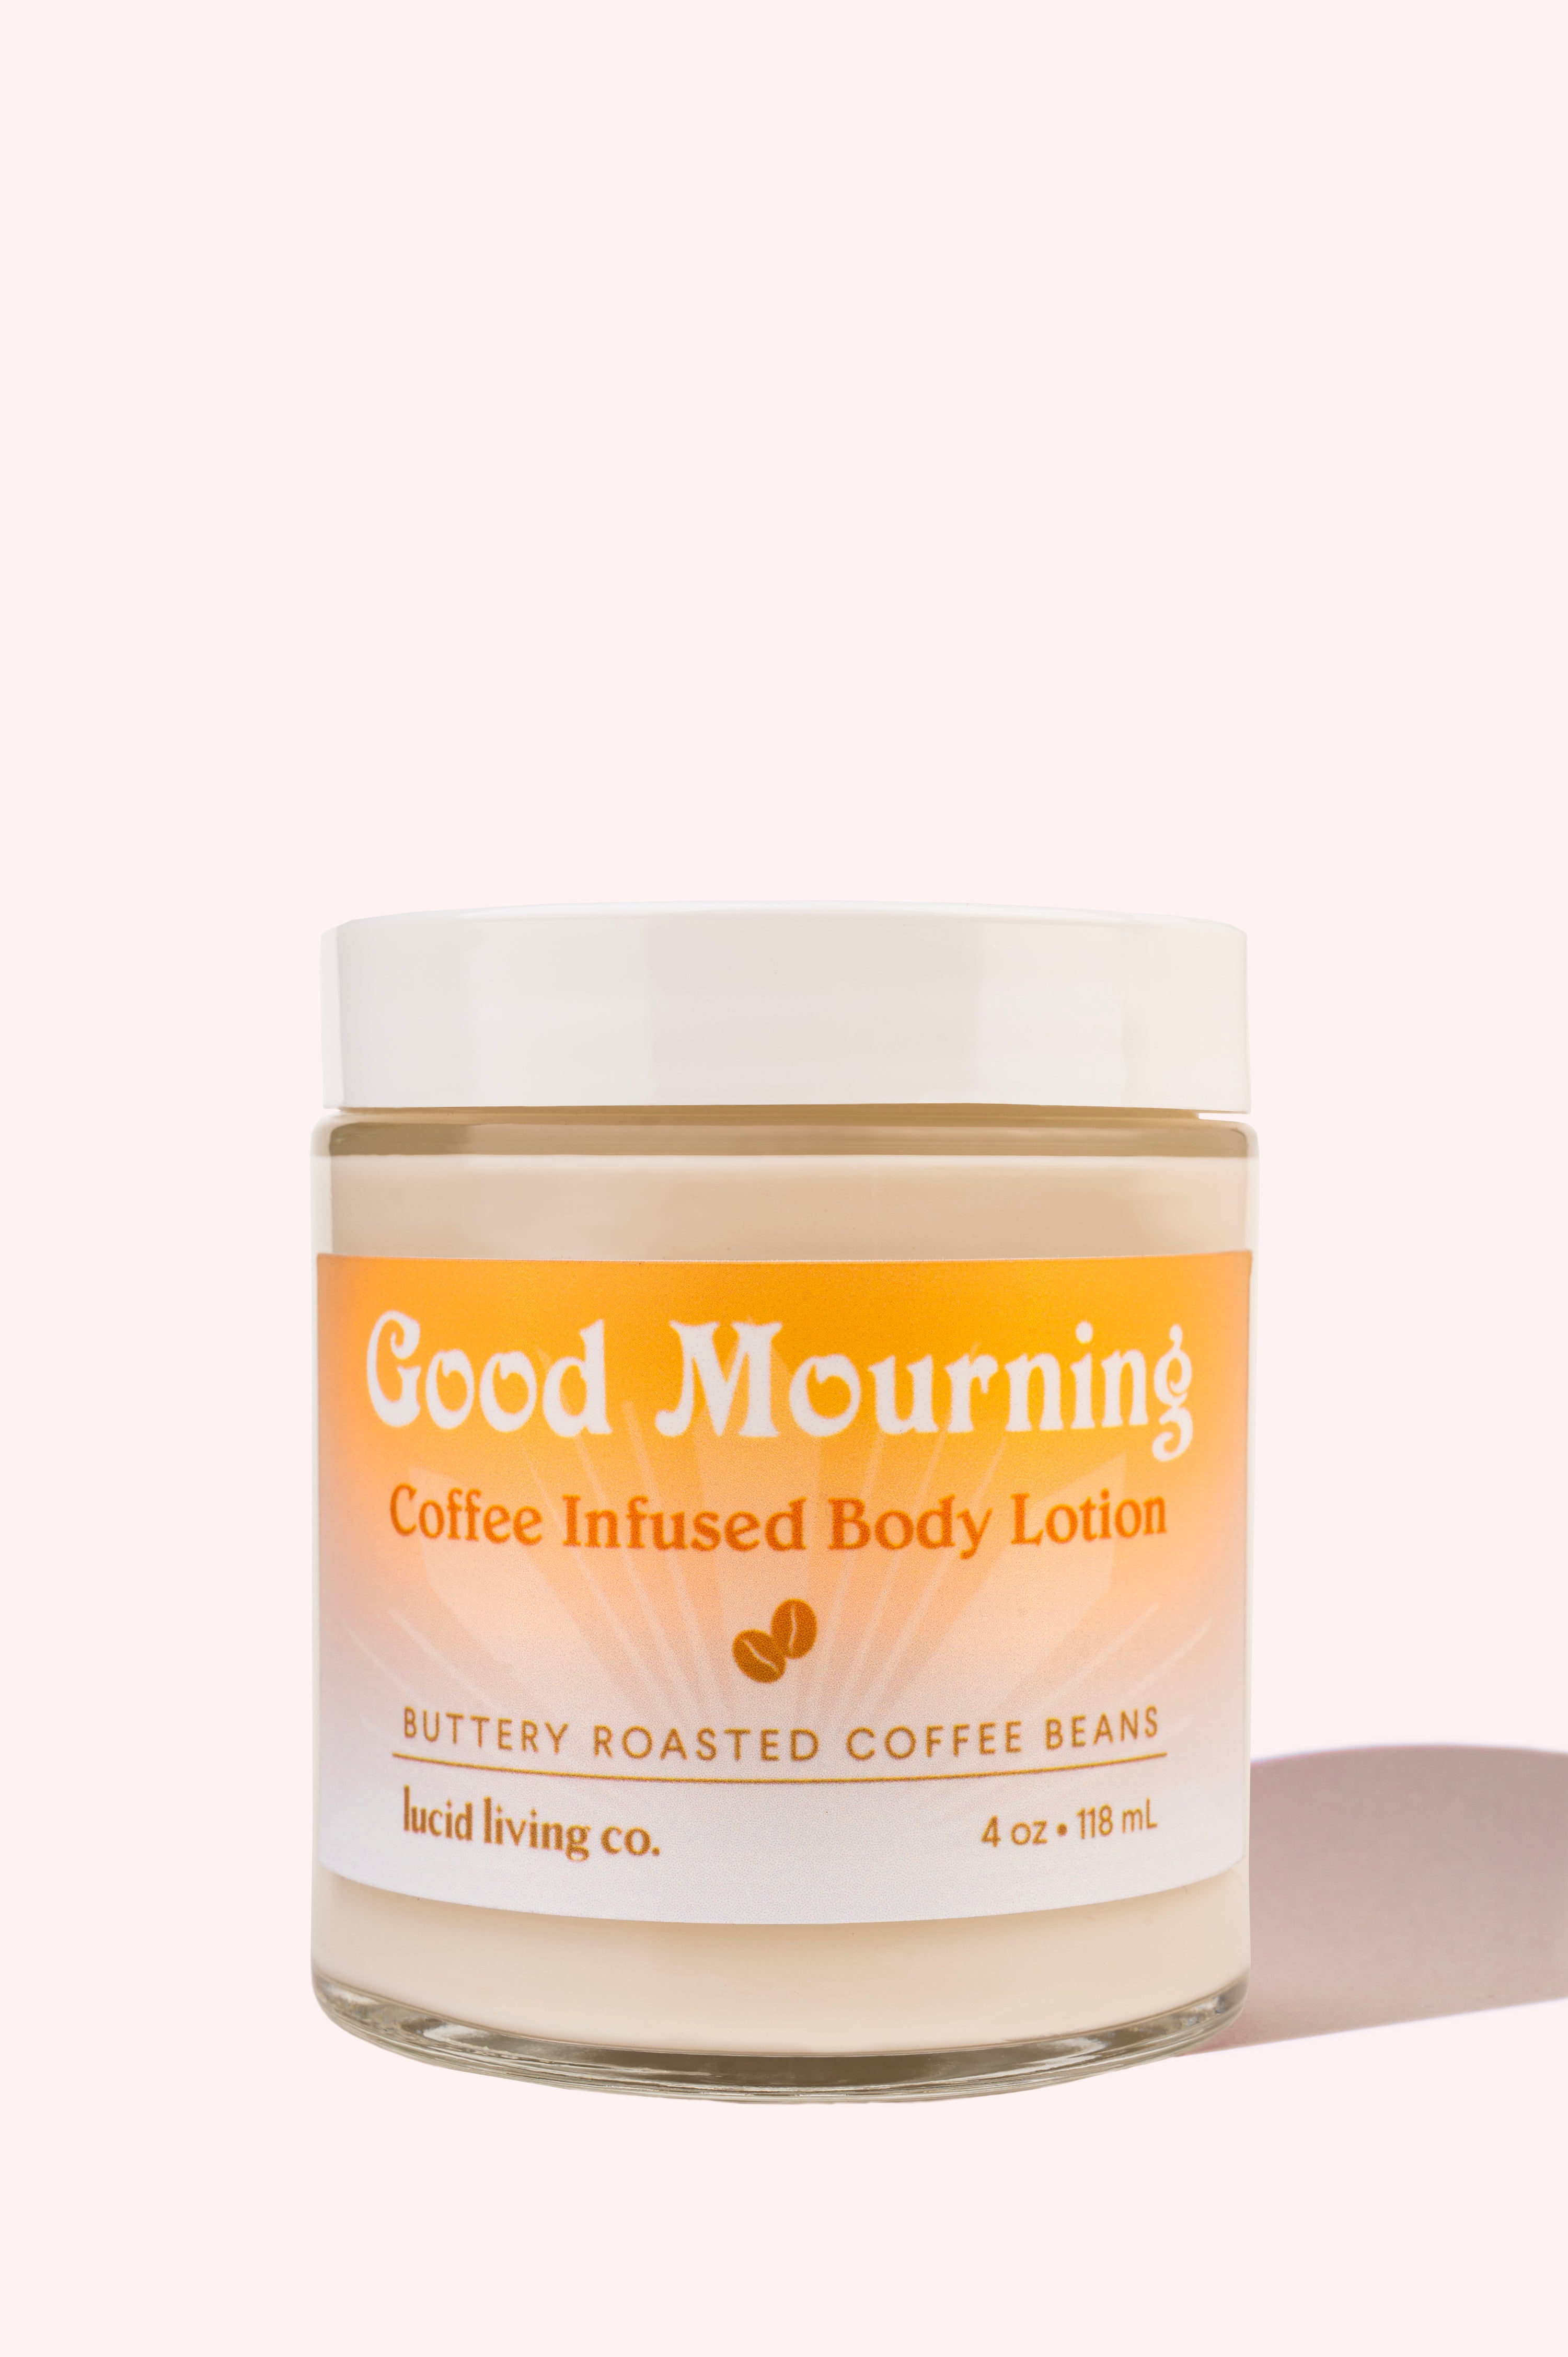 Good Mourning Coffee Infused Body Lotion